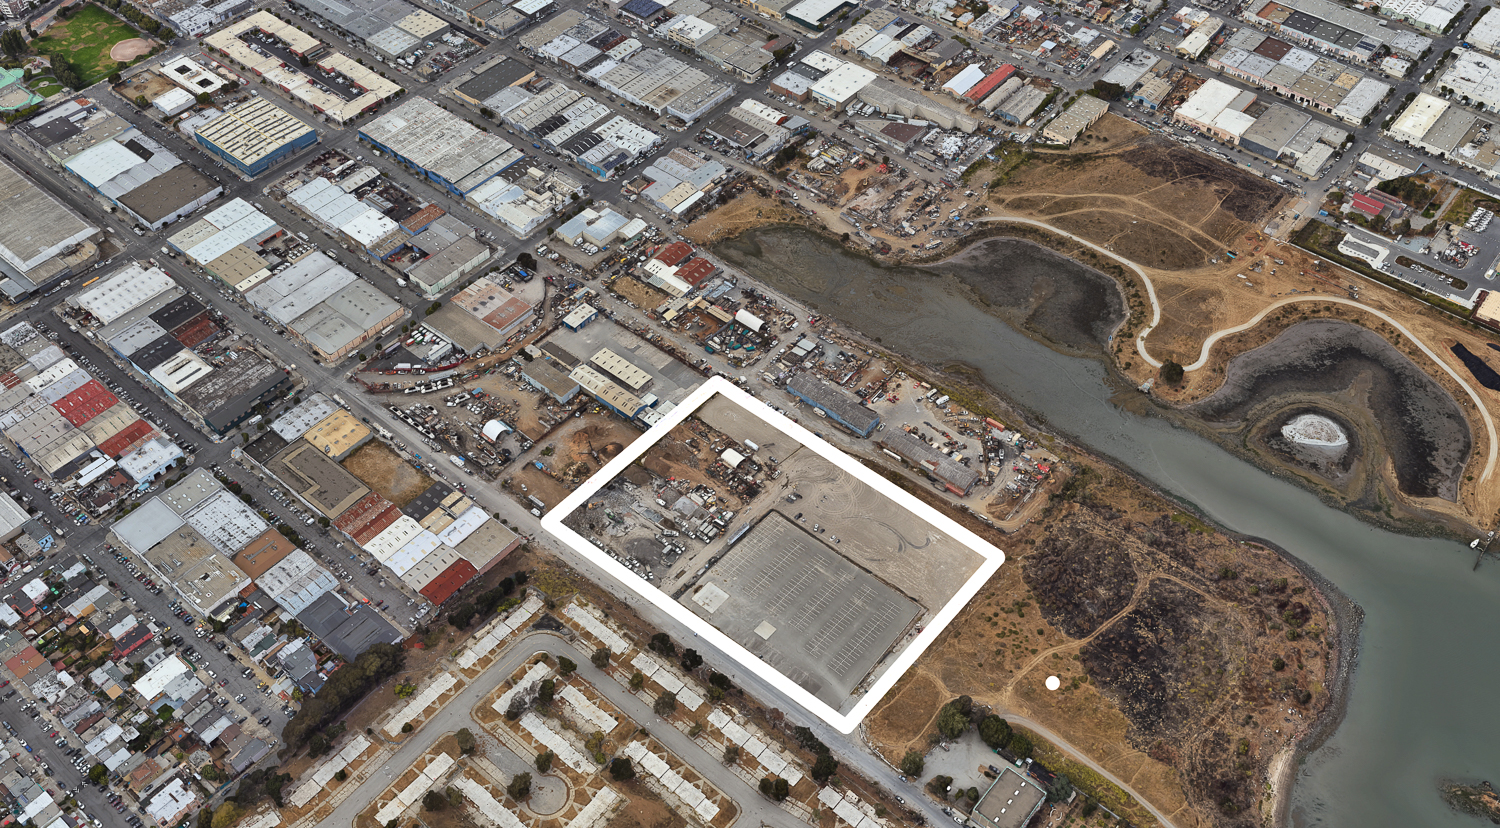 1236 Carroll Avenue project site roughly outlined by YIMBY, image via Google Satellite